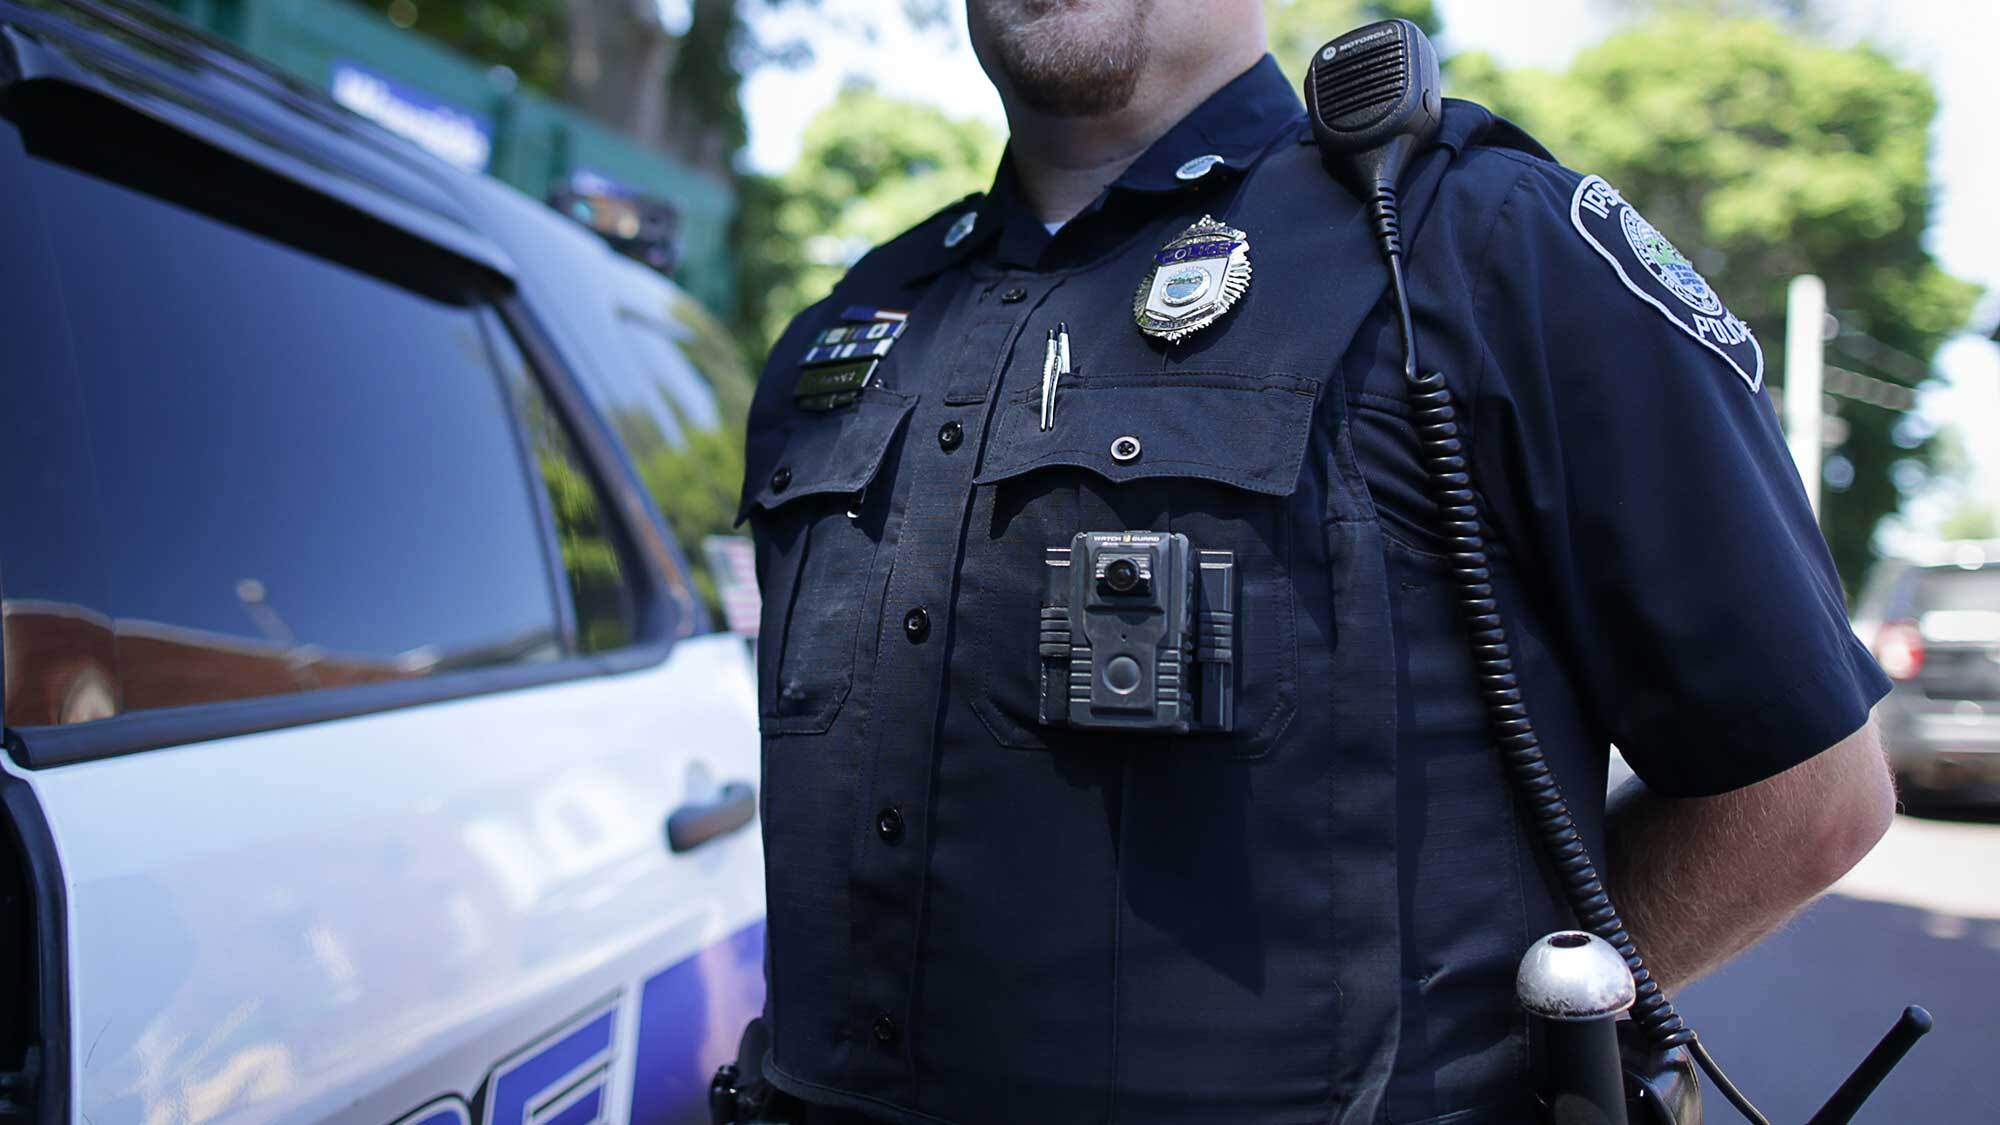 Chest of police officer in uniform wearing body camera next to police car.